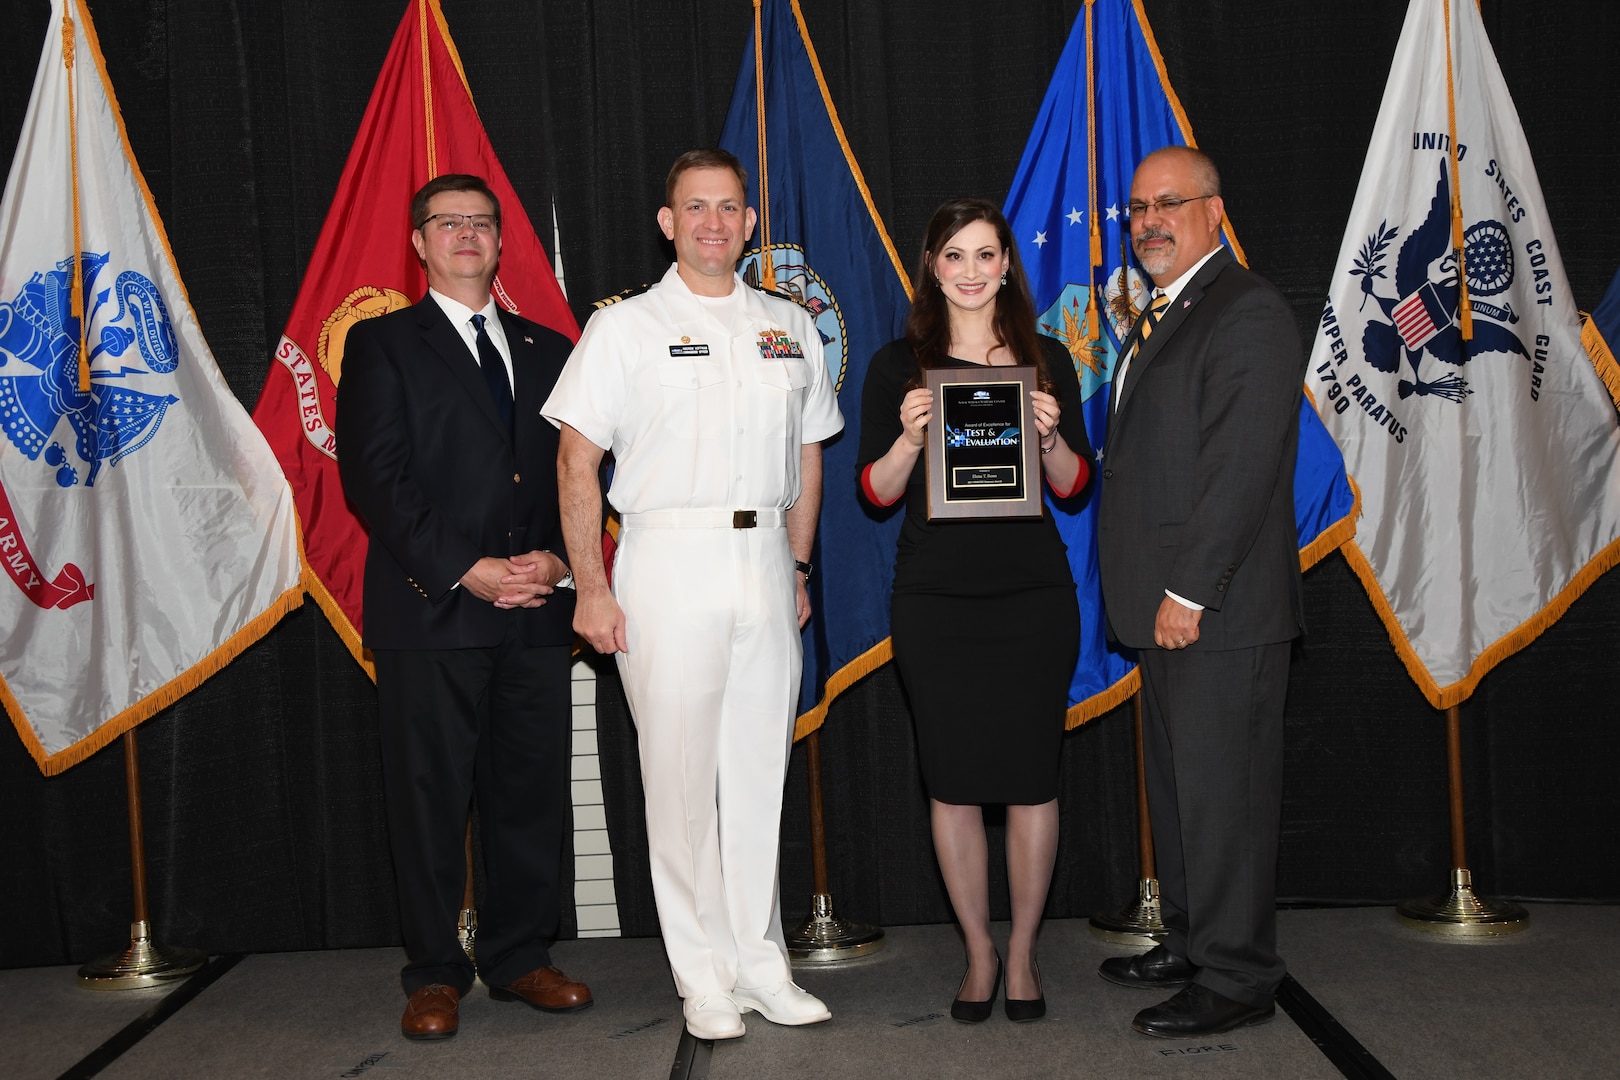 IMAGE: Elena Bono is presented the NSWCDD Award of Excellence for Test & Evaluation at Naval Surface Warfare Center Dahlgren Division's annual awards ceremony, Apr. 26 at the Fredericksburg Expo and Conference Center.

The NSWCDD Award of Excellence for Test & Evaluation was established to recognize individuals who have made a notable and significant impact to NSWCDD through their outstanding performance in Test and Evaluation, the collection, analysis, and assessment of data to characterize and/or measure the performance of a component, system, platform, or mission.